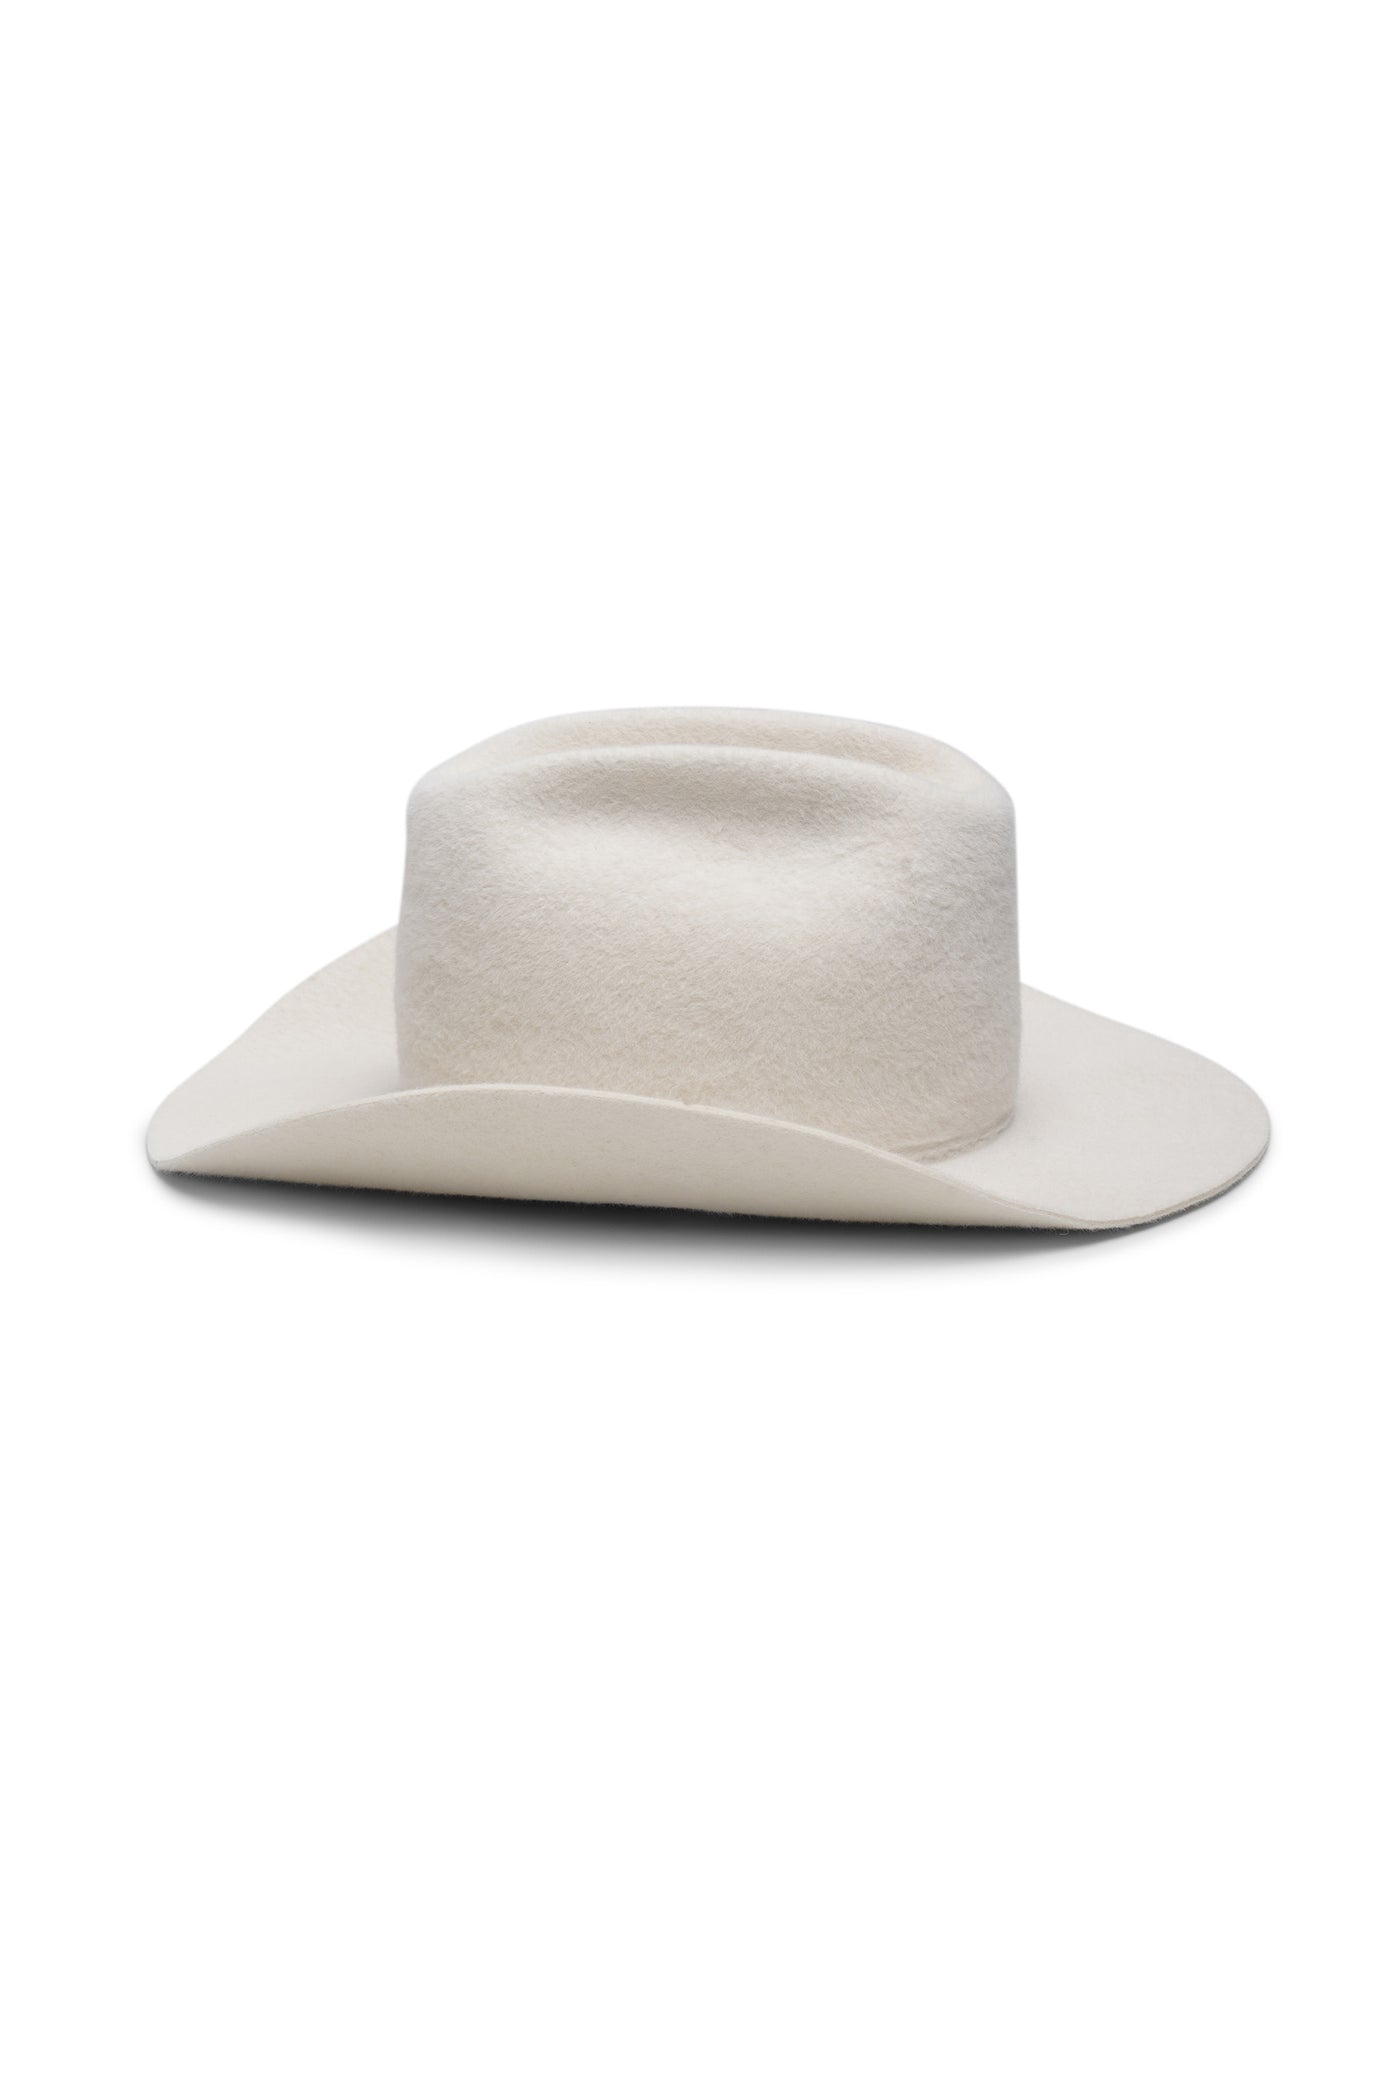 White cowboy in 100% fur felt hat with a wide brim and center crease. Paracord chin strap detail in white and blue. Unisex hat style in various sizes and colors. We ship worldwide. Shop now. Each SoonNoon hat is handmade with unique character in Stockholm, Sweden.